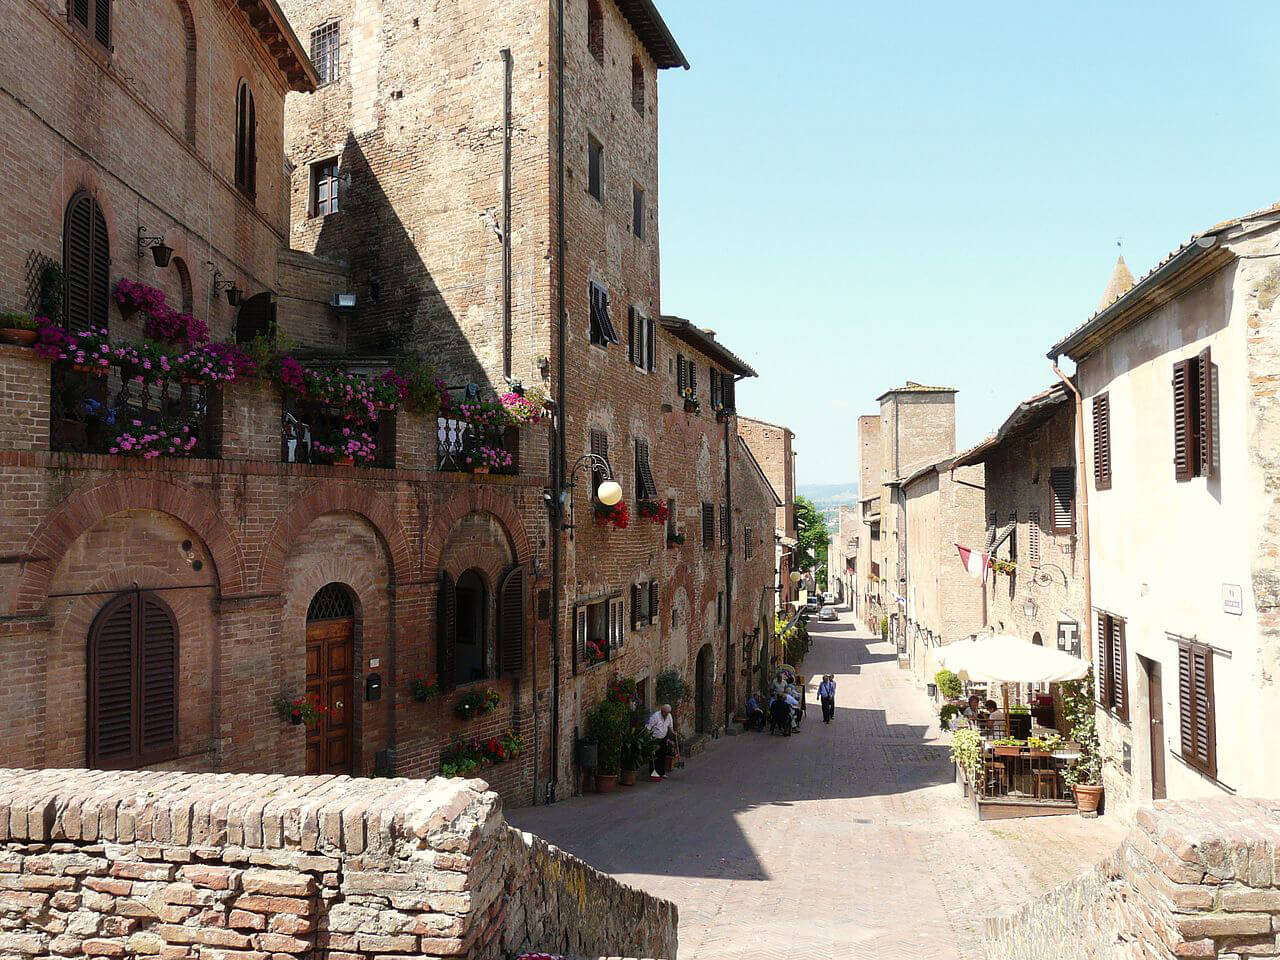 The central road of medieval town of Certaldo (Tuscany)